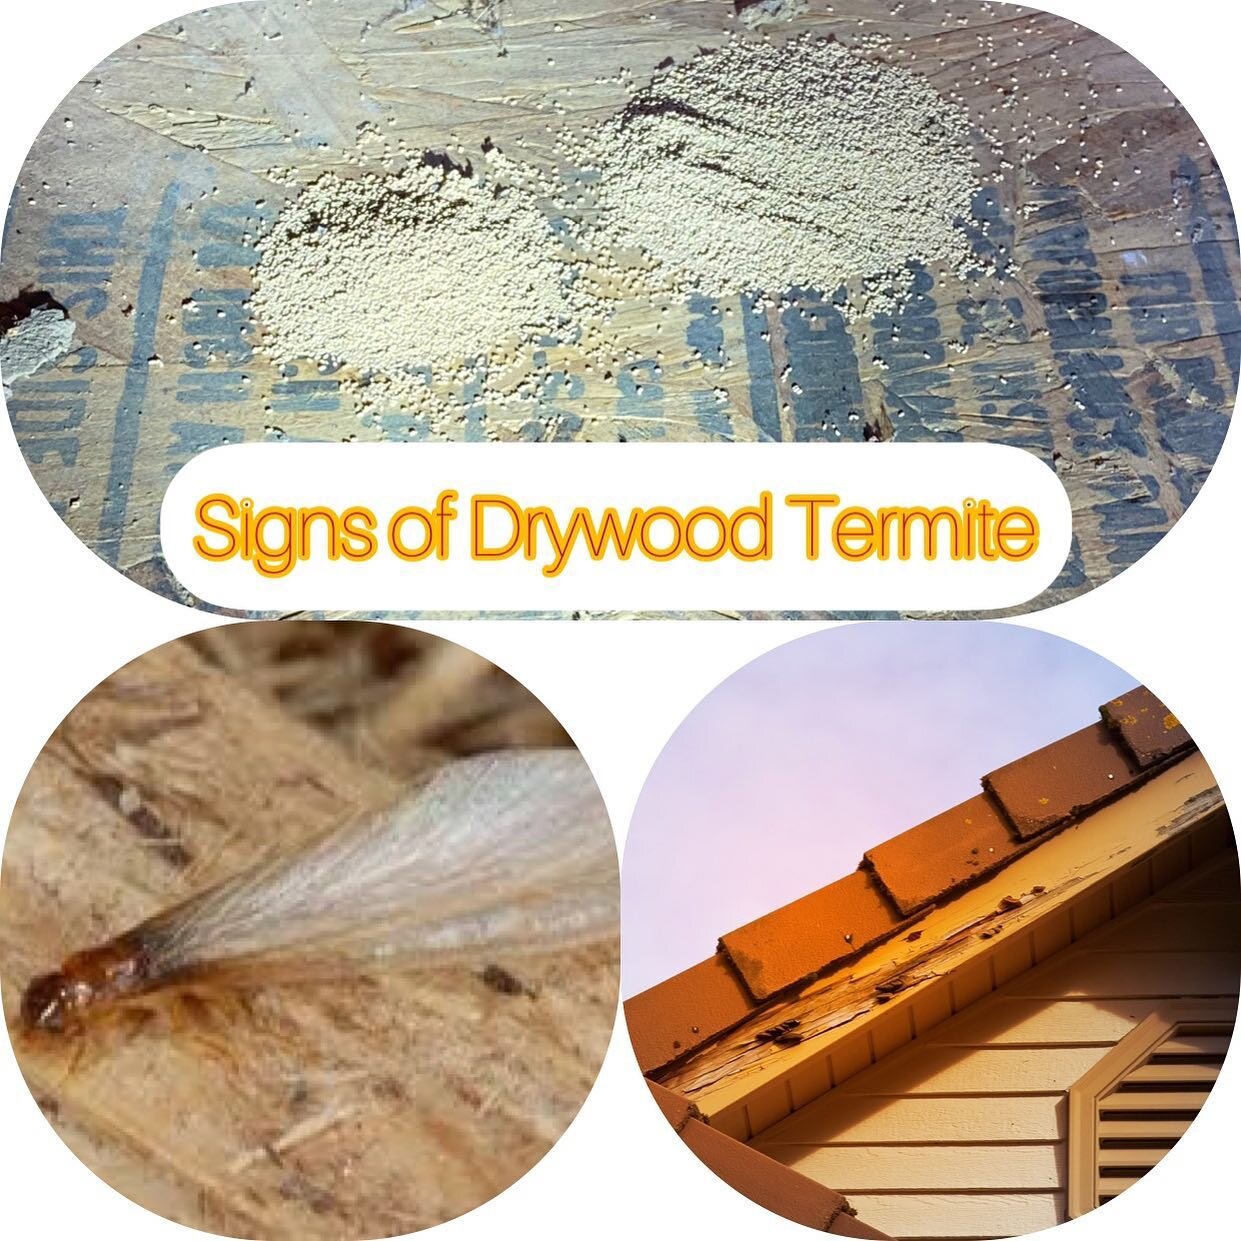 Signs of drywood termite: droppings, swarmers and wood damage. #termite #pestcontrol